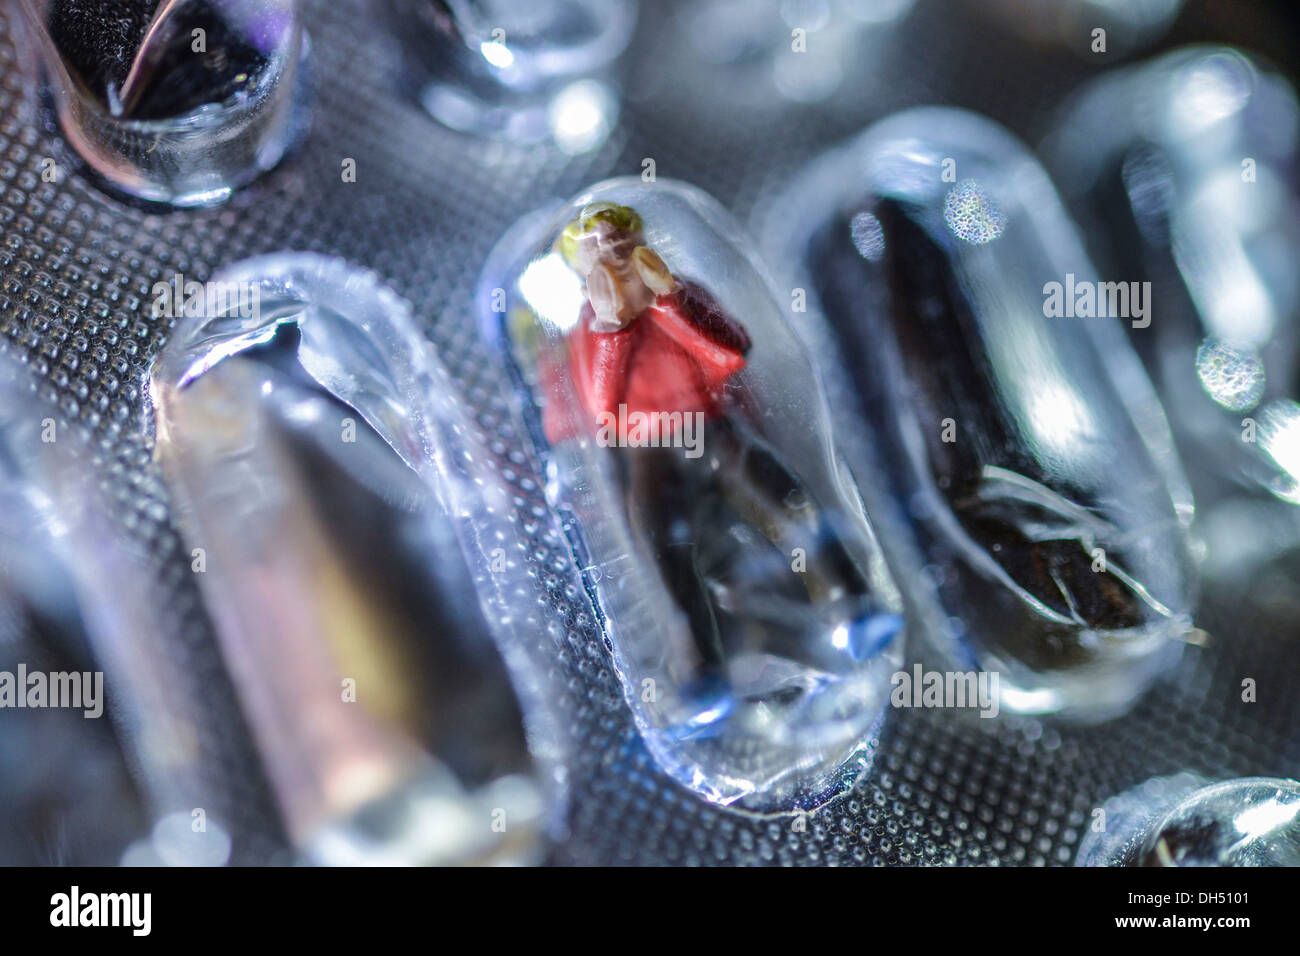 Miniature figure in a blister pack of tablets Stock Photo